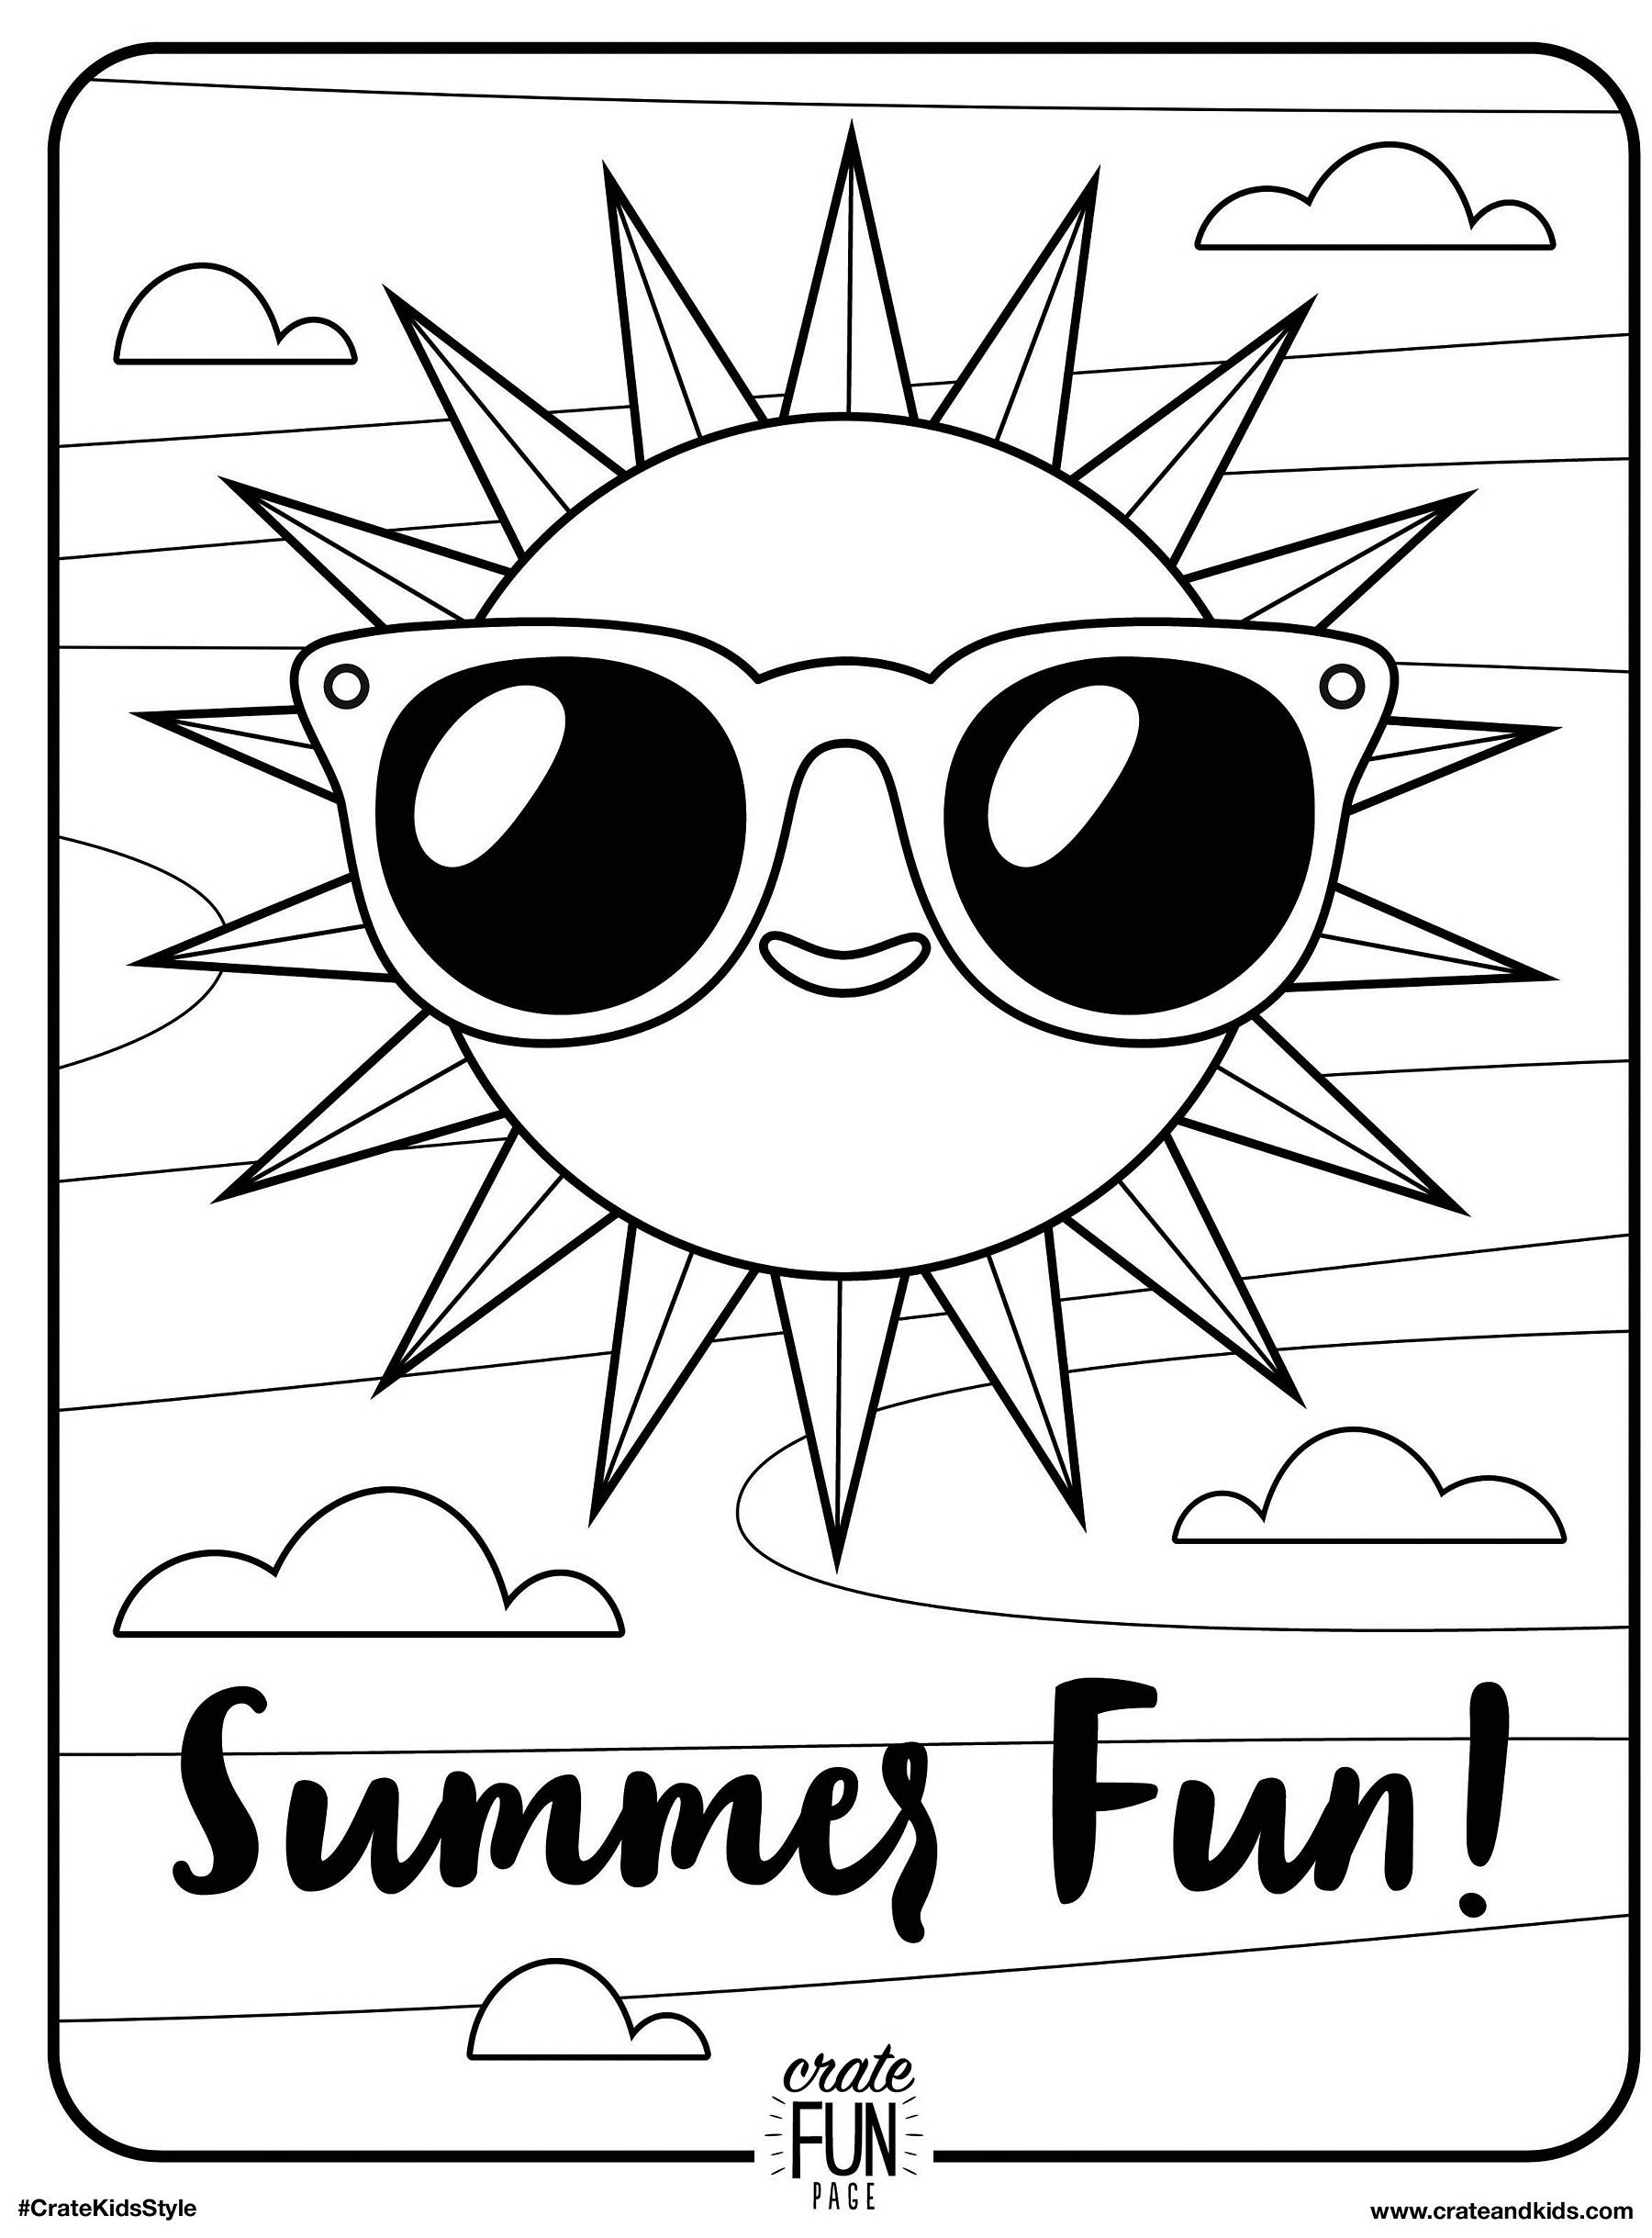 kids-summer-fun-free-printable-coloring-page-crate-kids-canada